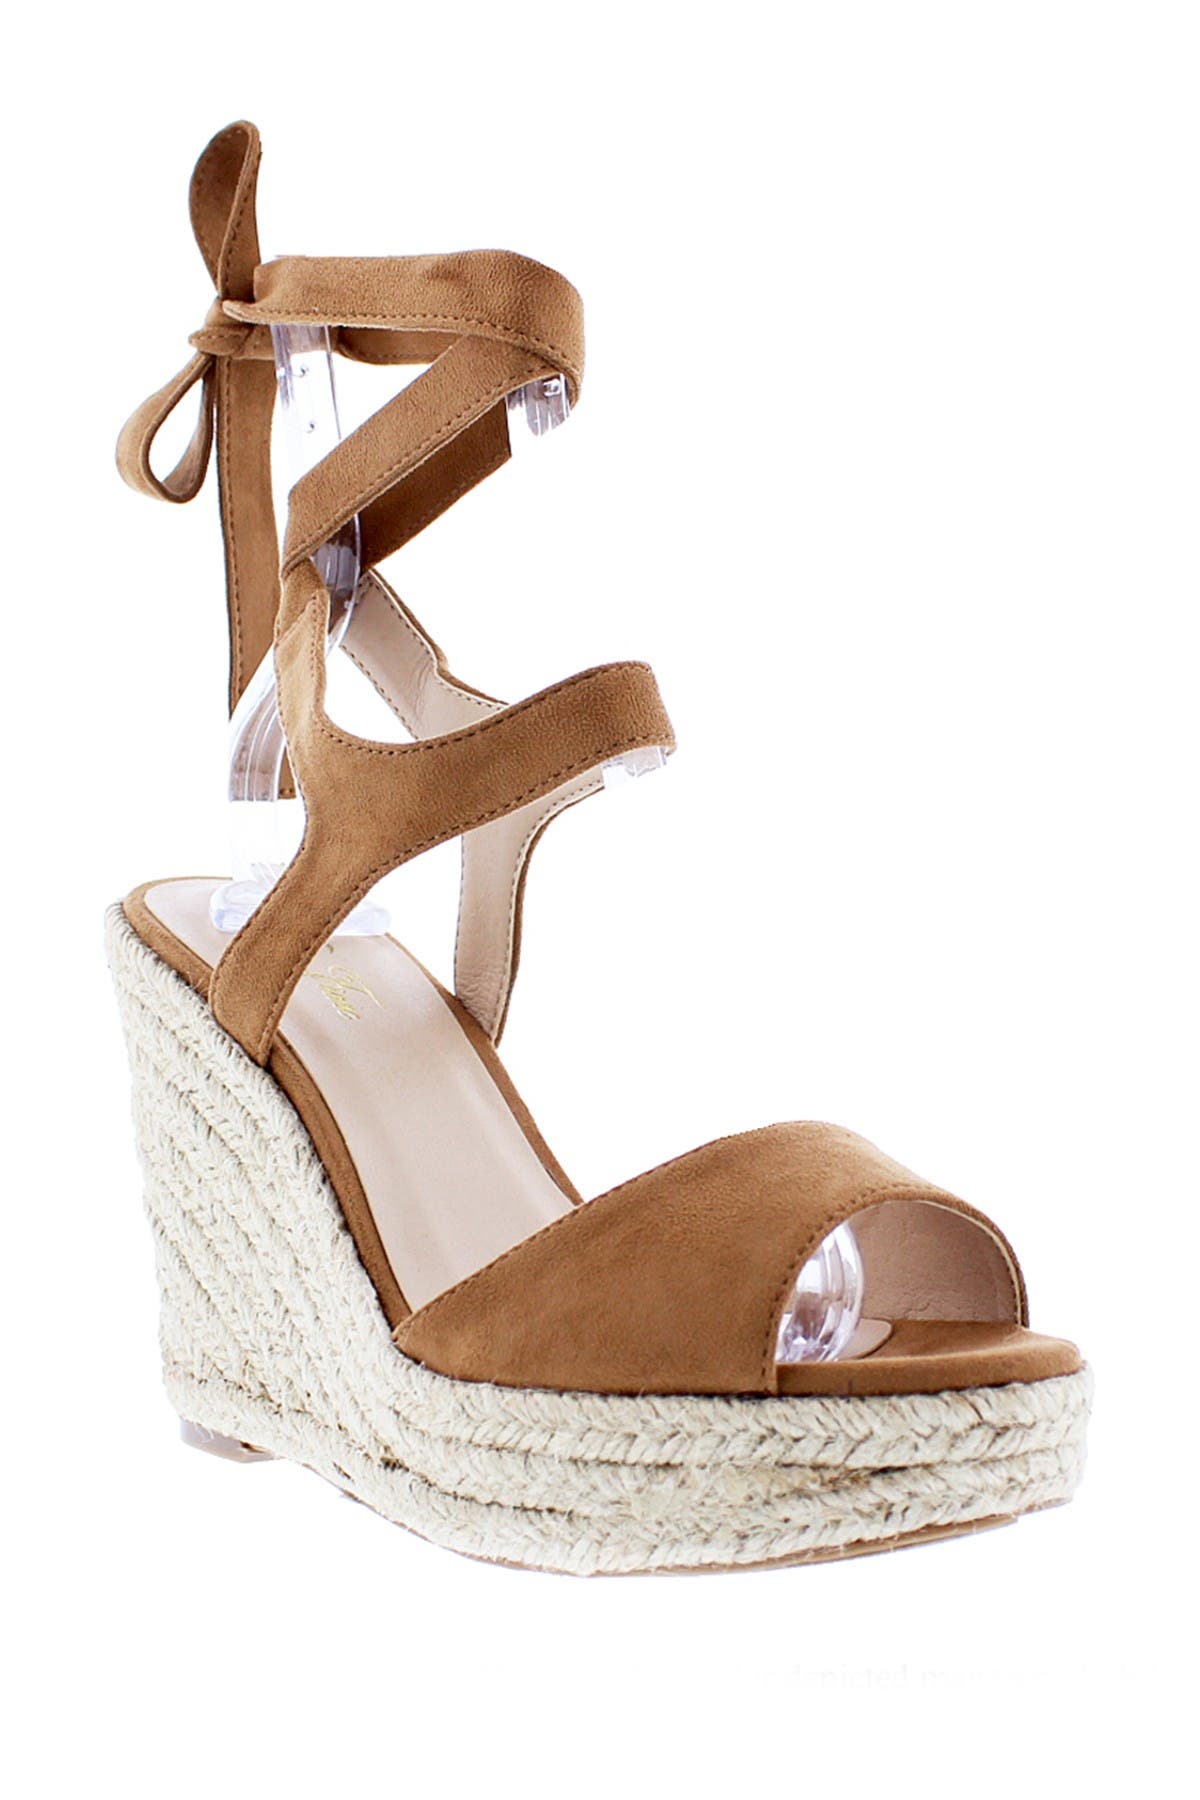 wrap around ankle wedges